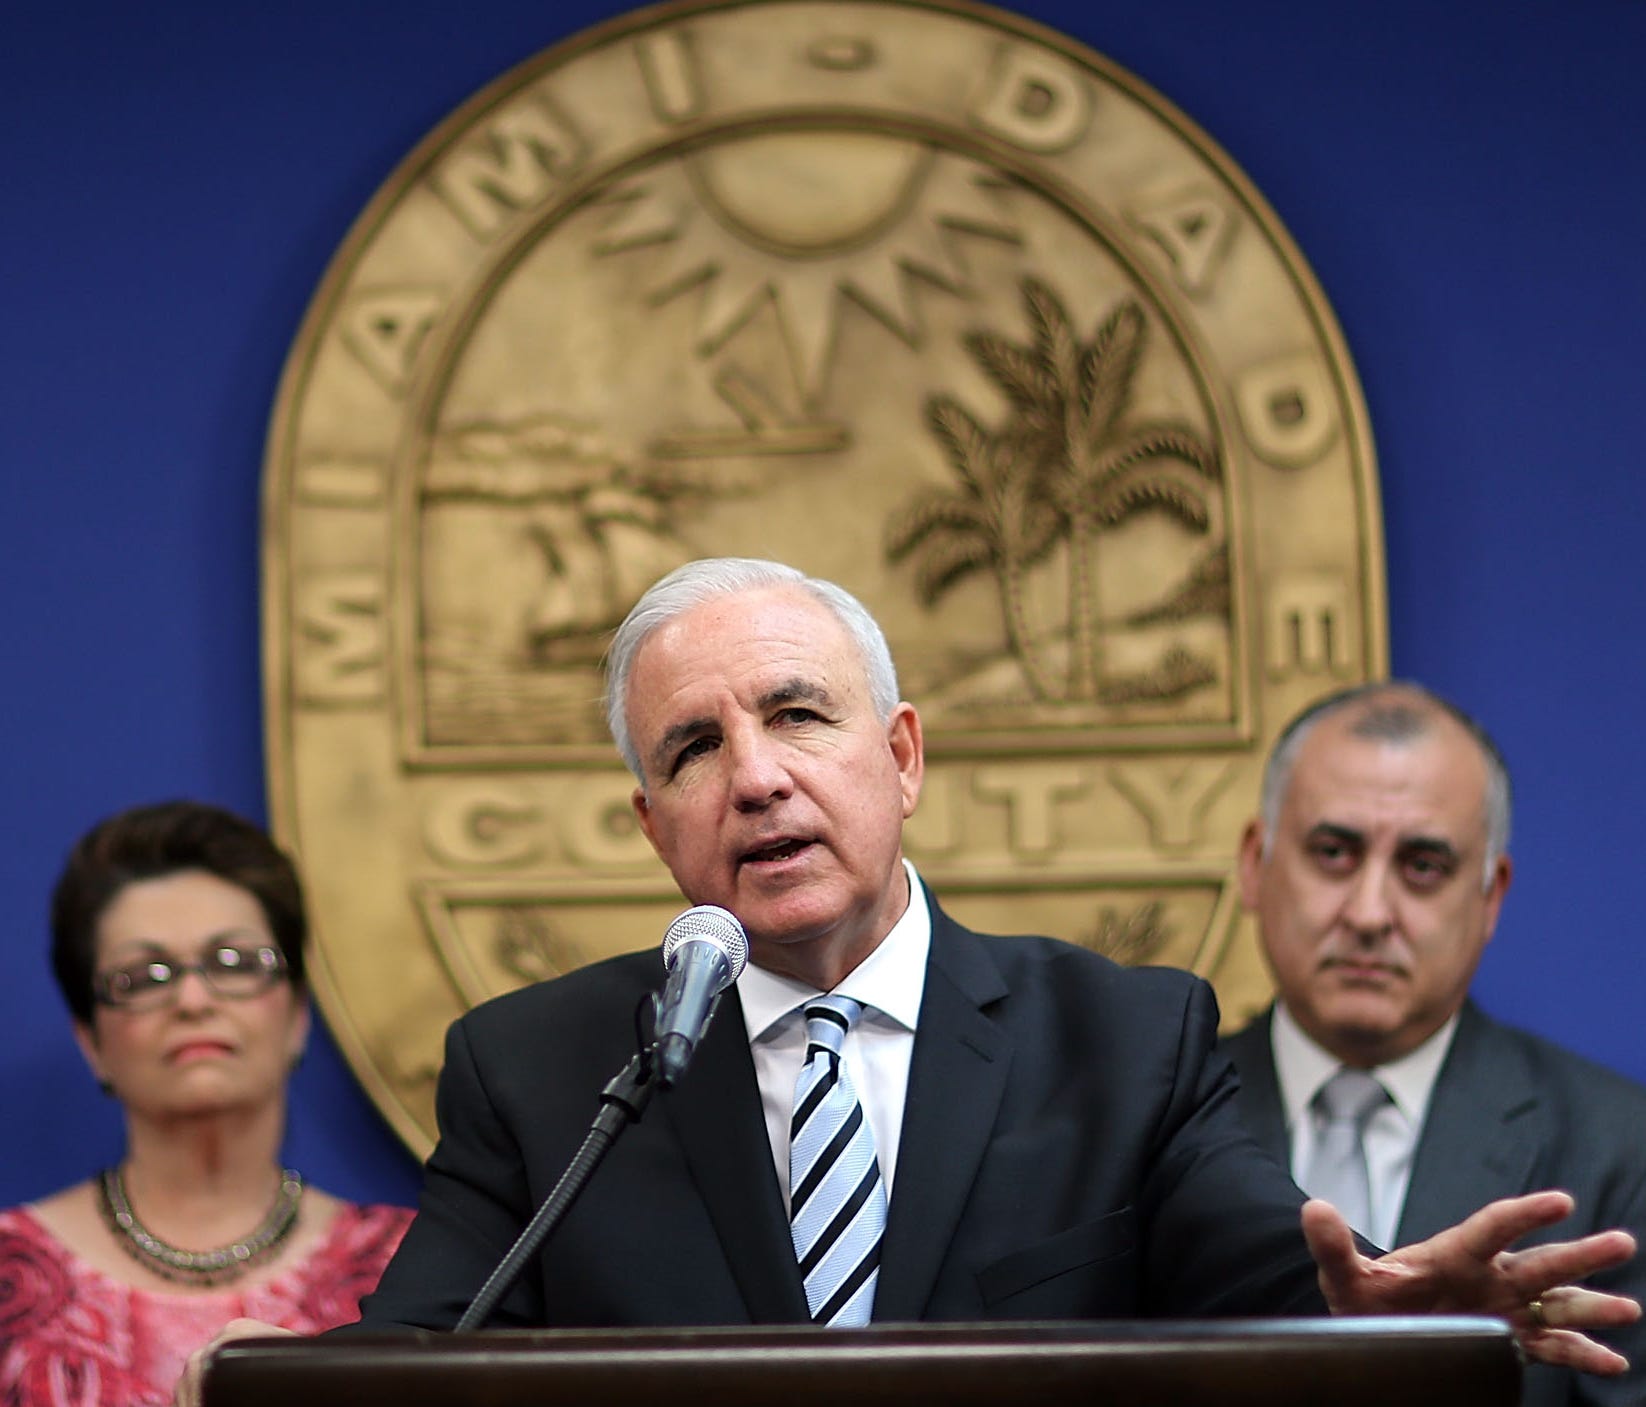 Miami-Dade County Mayor Carlos Gimenez (center) speaks during a hurricane preparedness press conference at the Miami-Dade County Emergency Operations Center on May 29, 2015 in Doral, Florida.